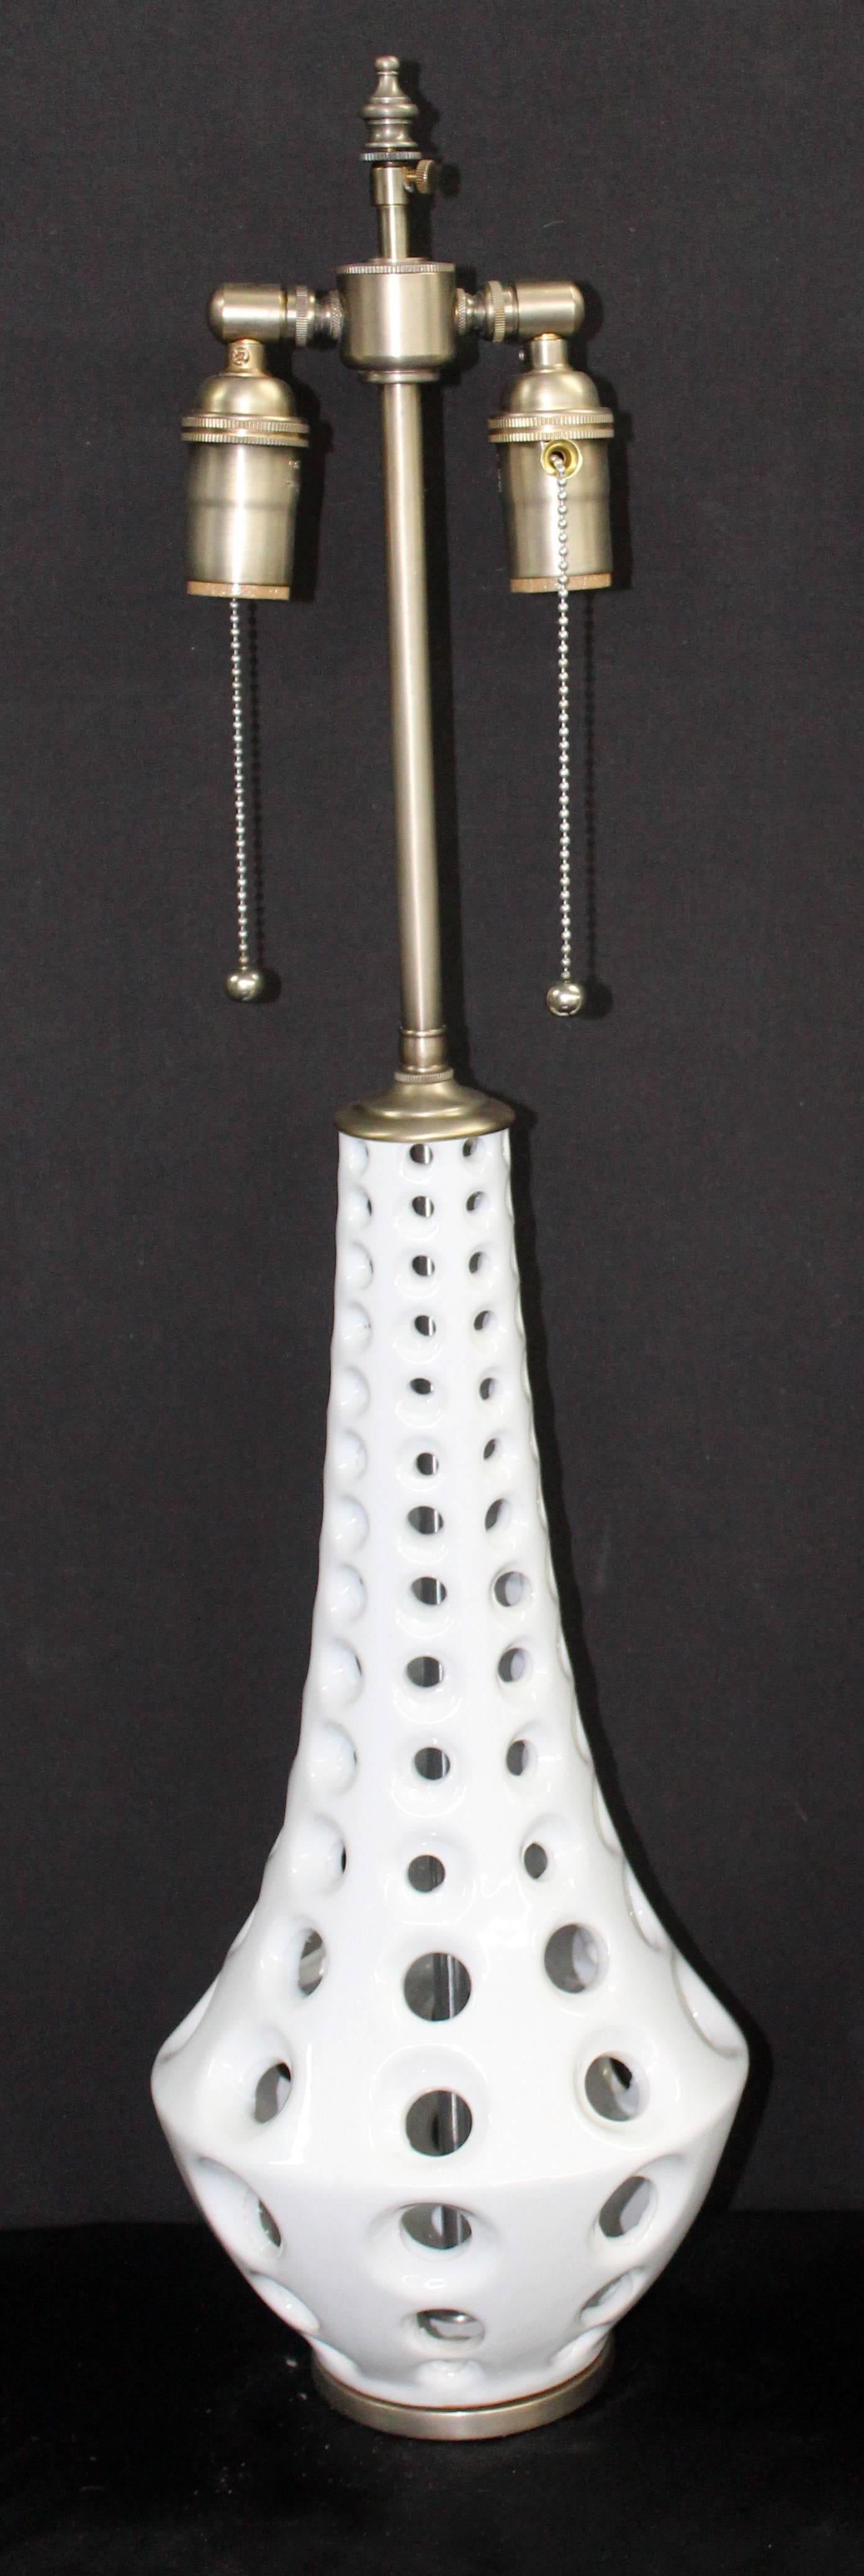 Unique pair of Mid-Century ceramic vessels with lamp application. The vessels height is 15". The shade post height is 27" with an extendable 3" adjuster the hardware is in brushed nickel. The lamps are newly wired and will accommodate